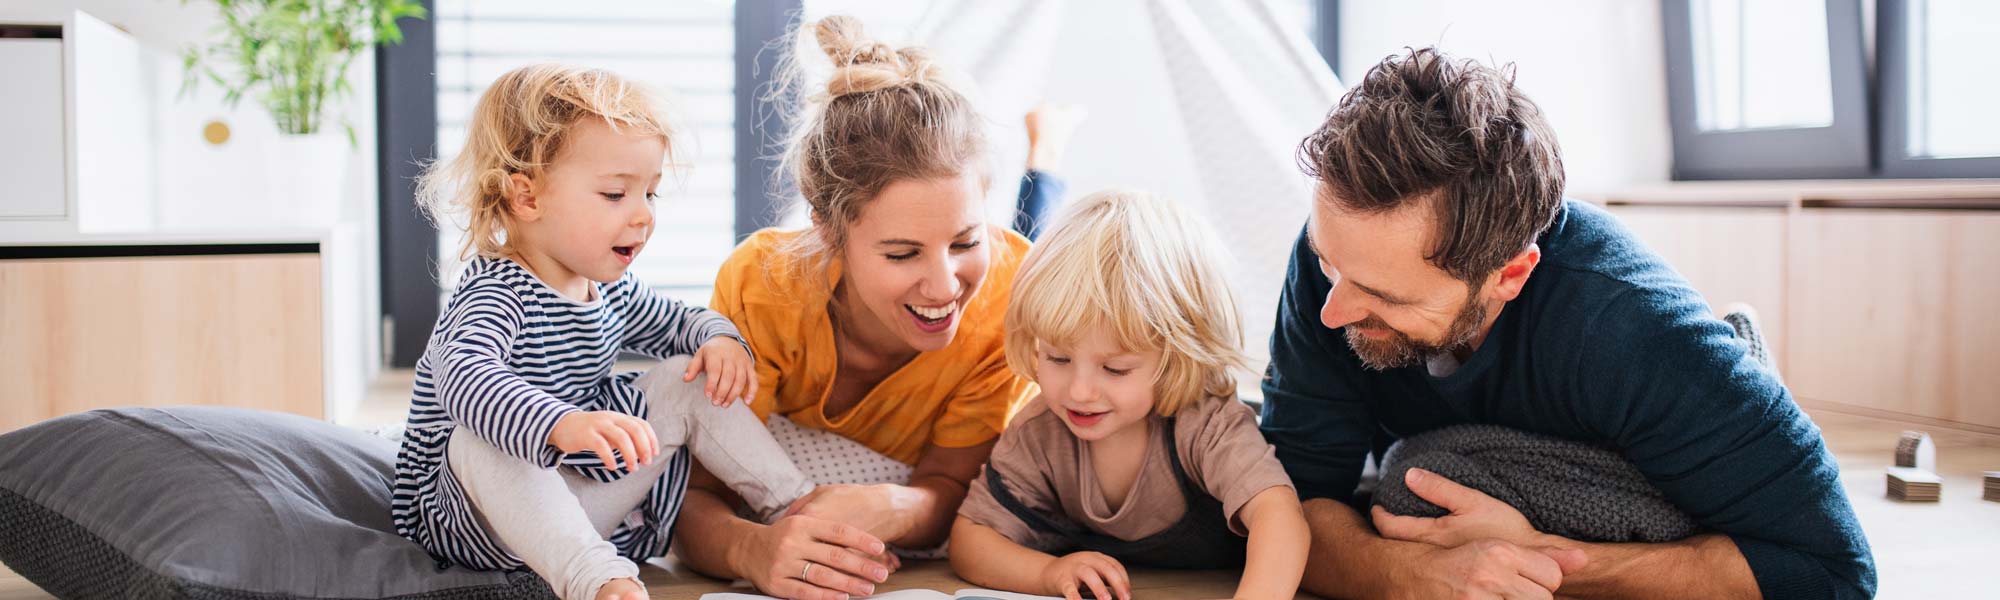 Family enjoying playtime in a comfortable home